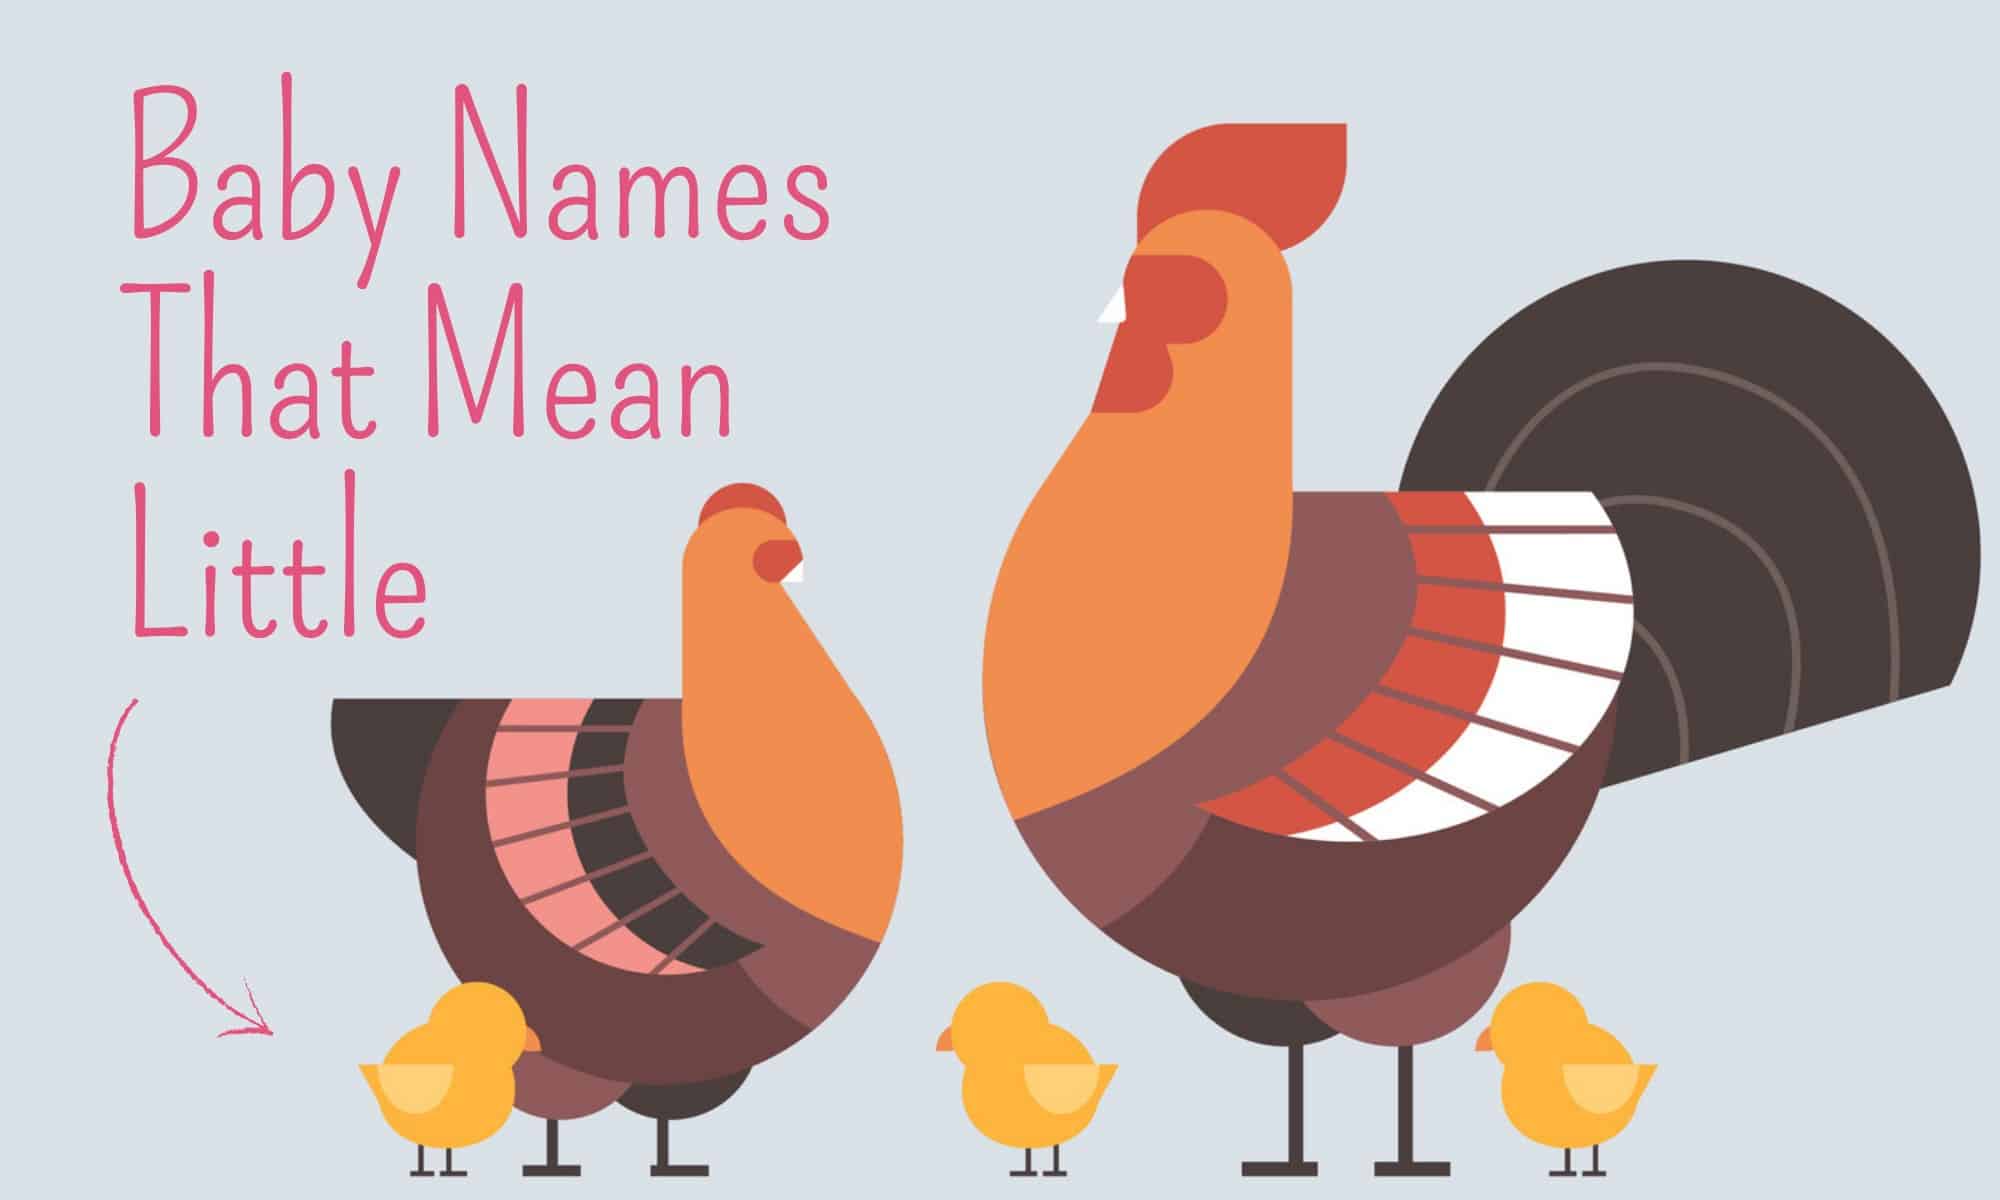 baby names that mean little